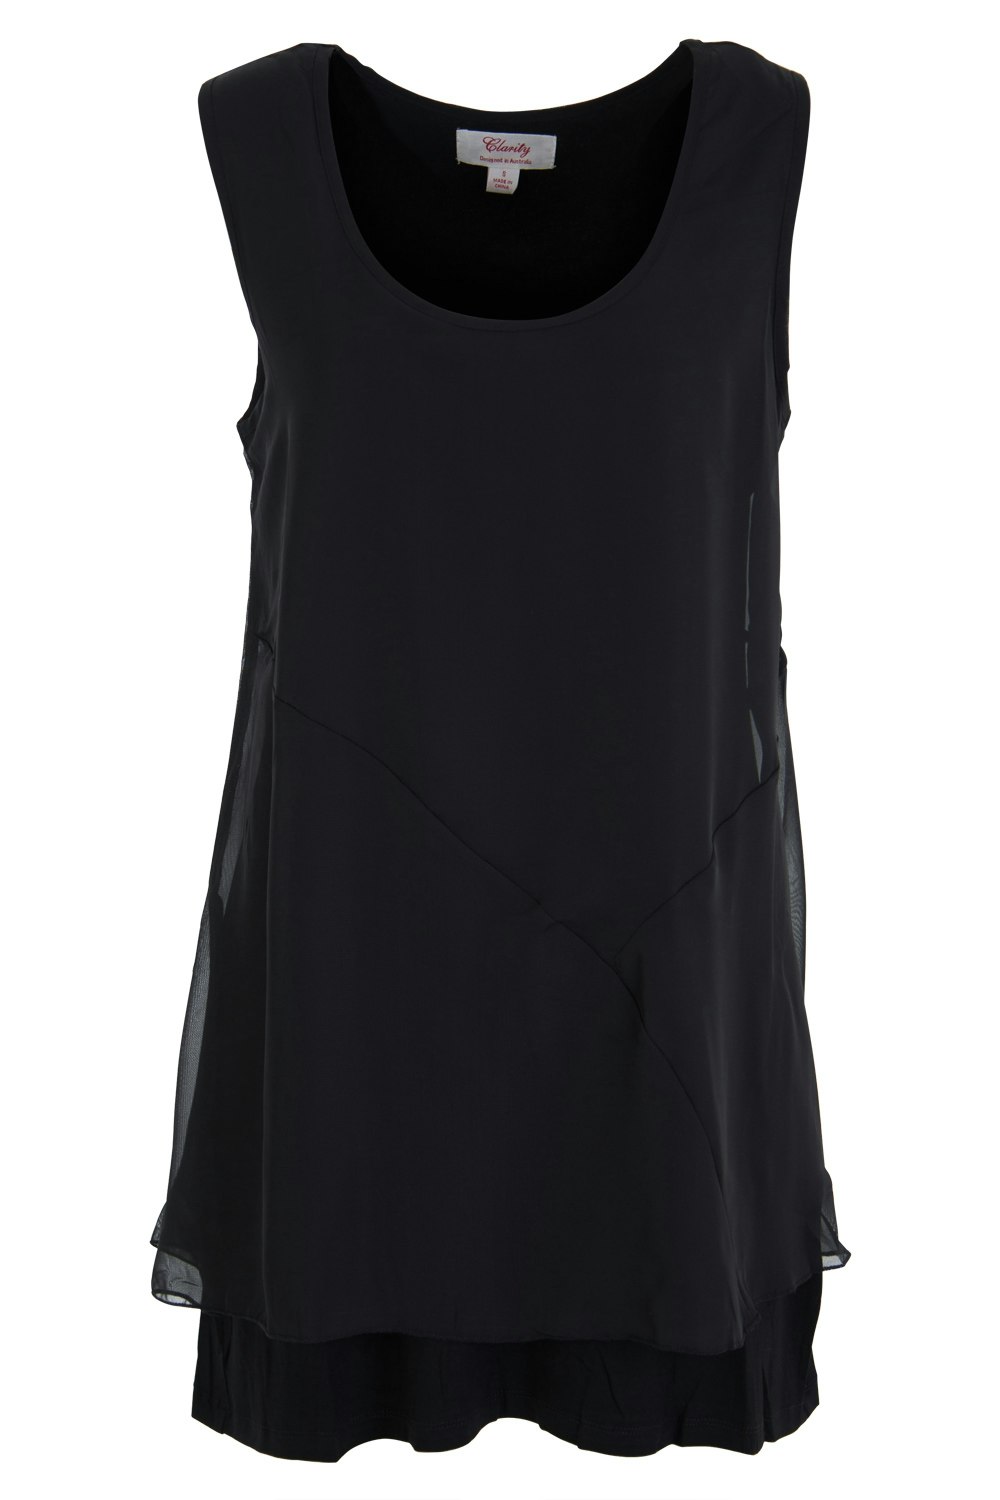 Clarity By Threadz Fashion for size 16+ Layered Singlet - Womens Tanks ...